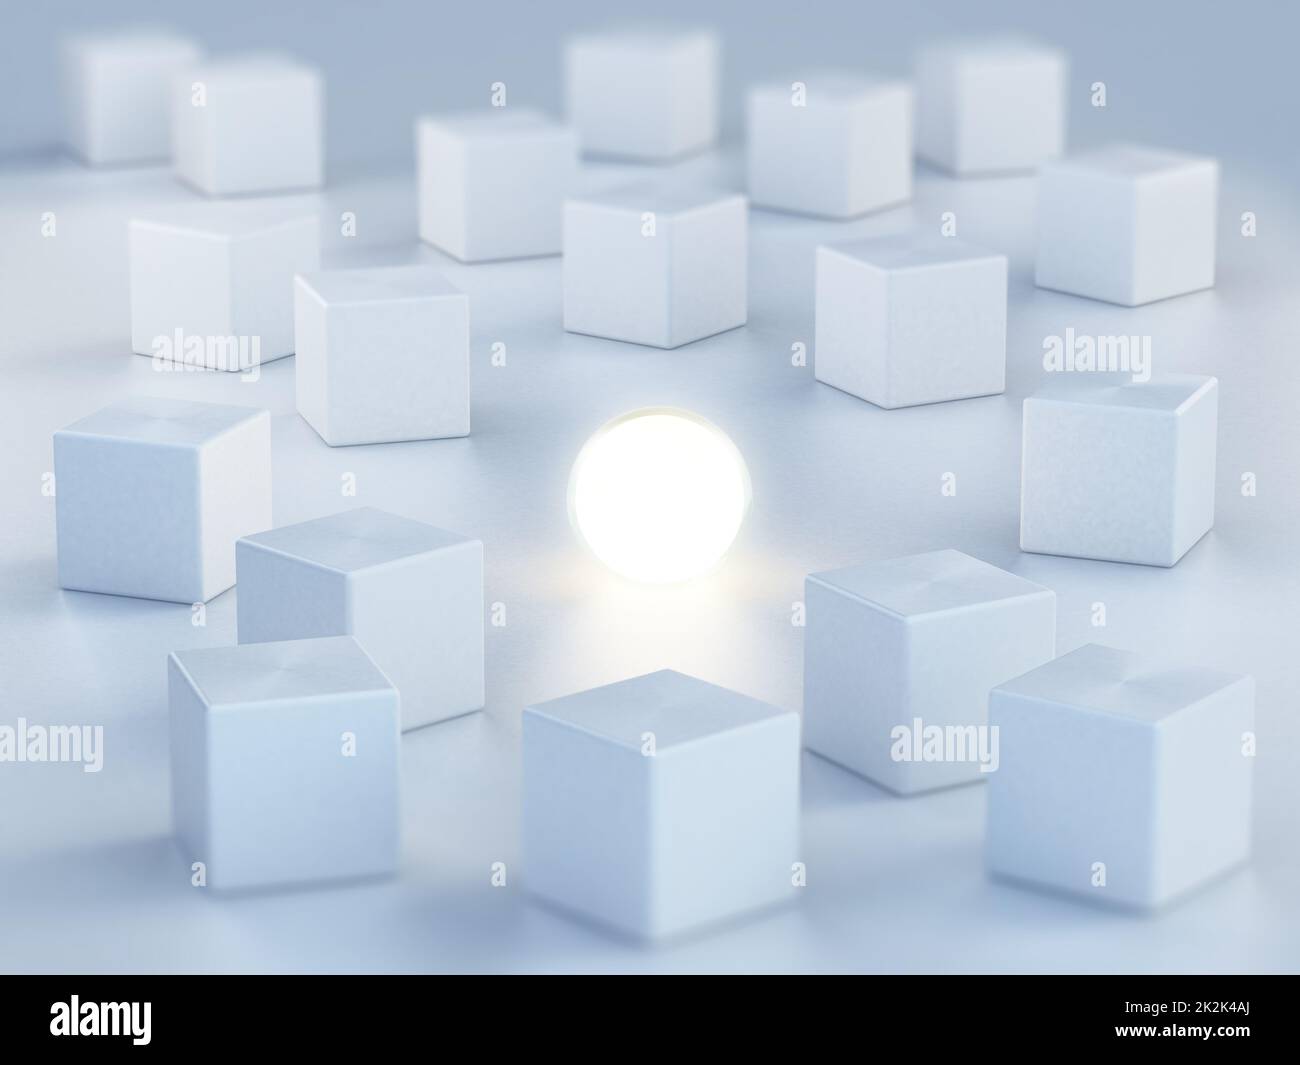 Sphere emitting light standing out among boxes. 3D illustration Stock Photo